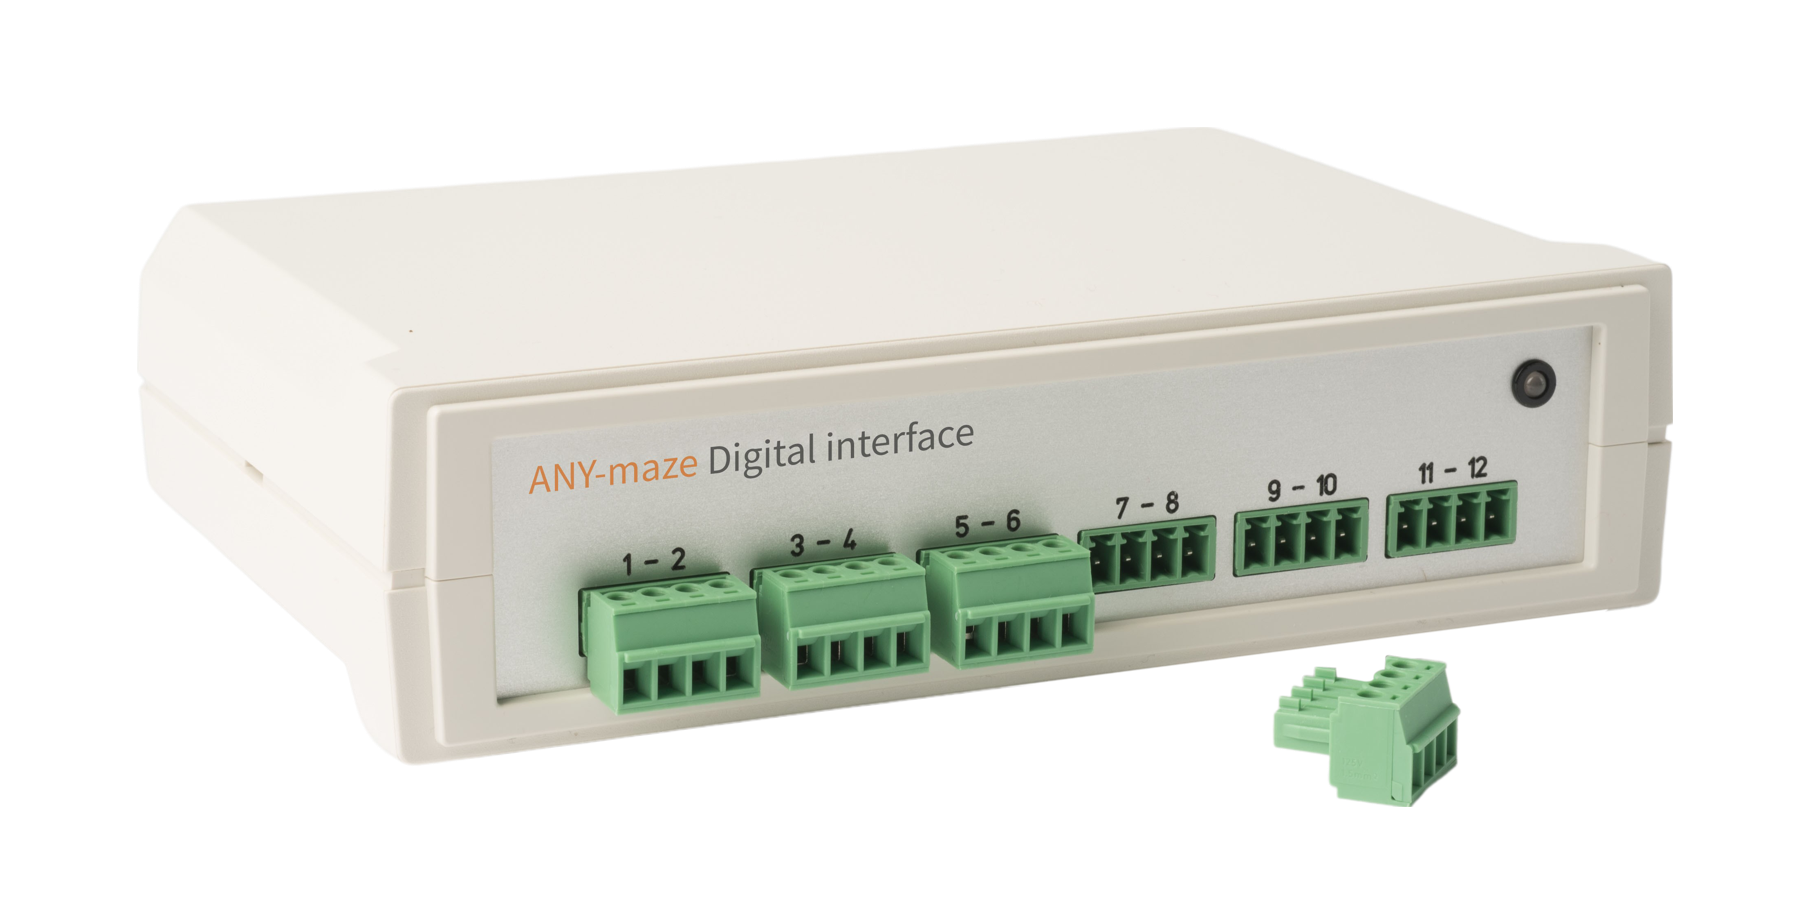 The ANY-maze Digital interface picture